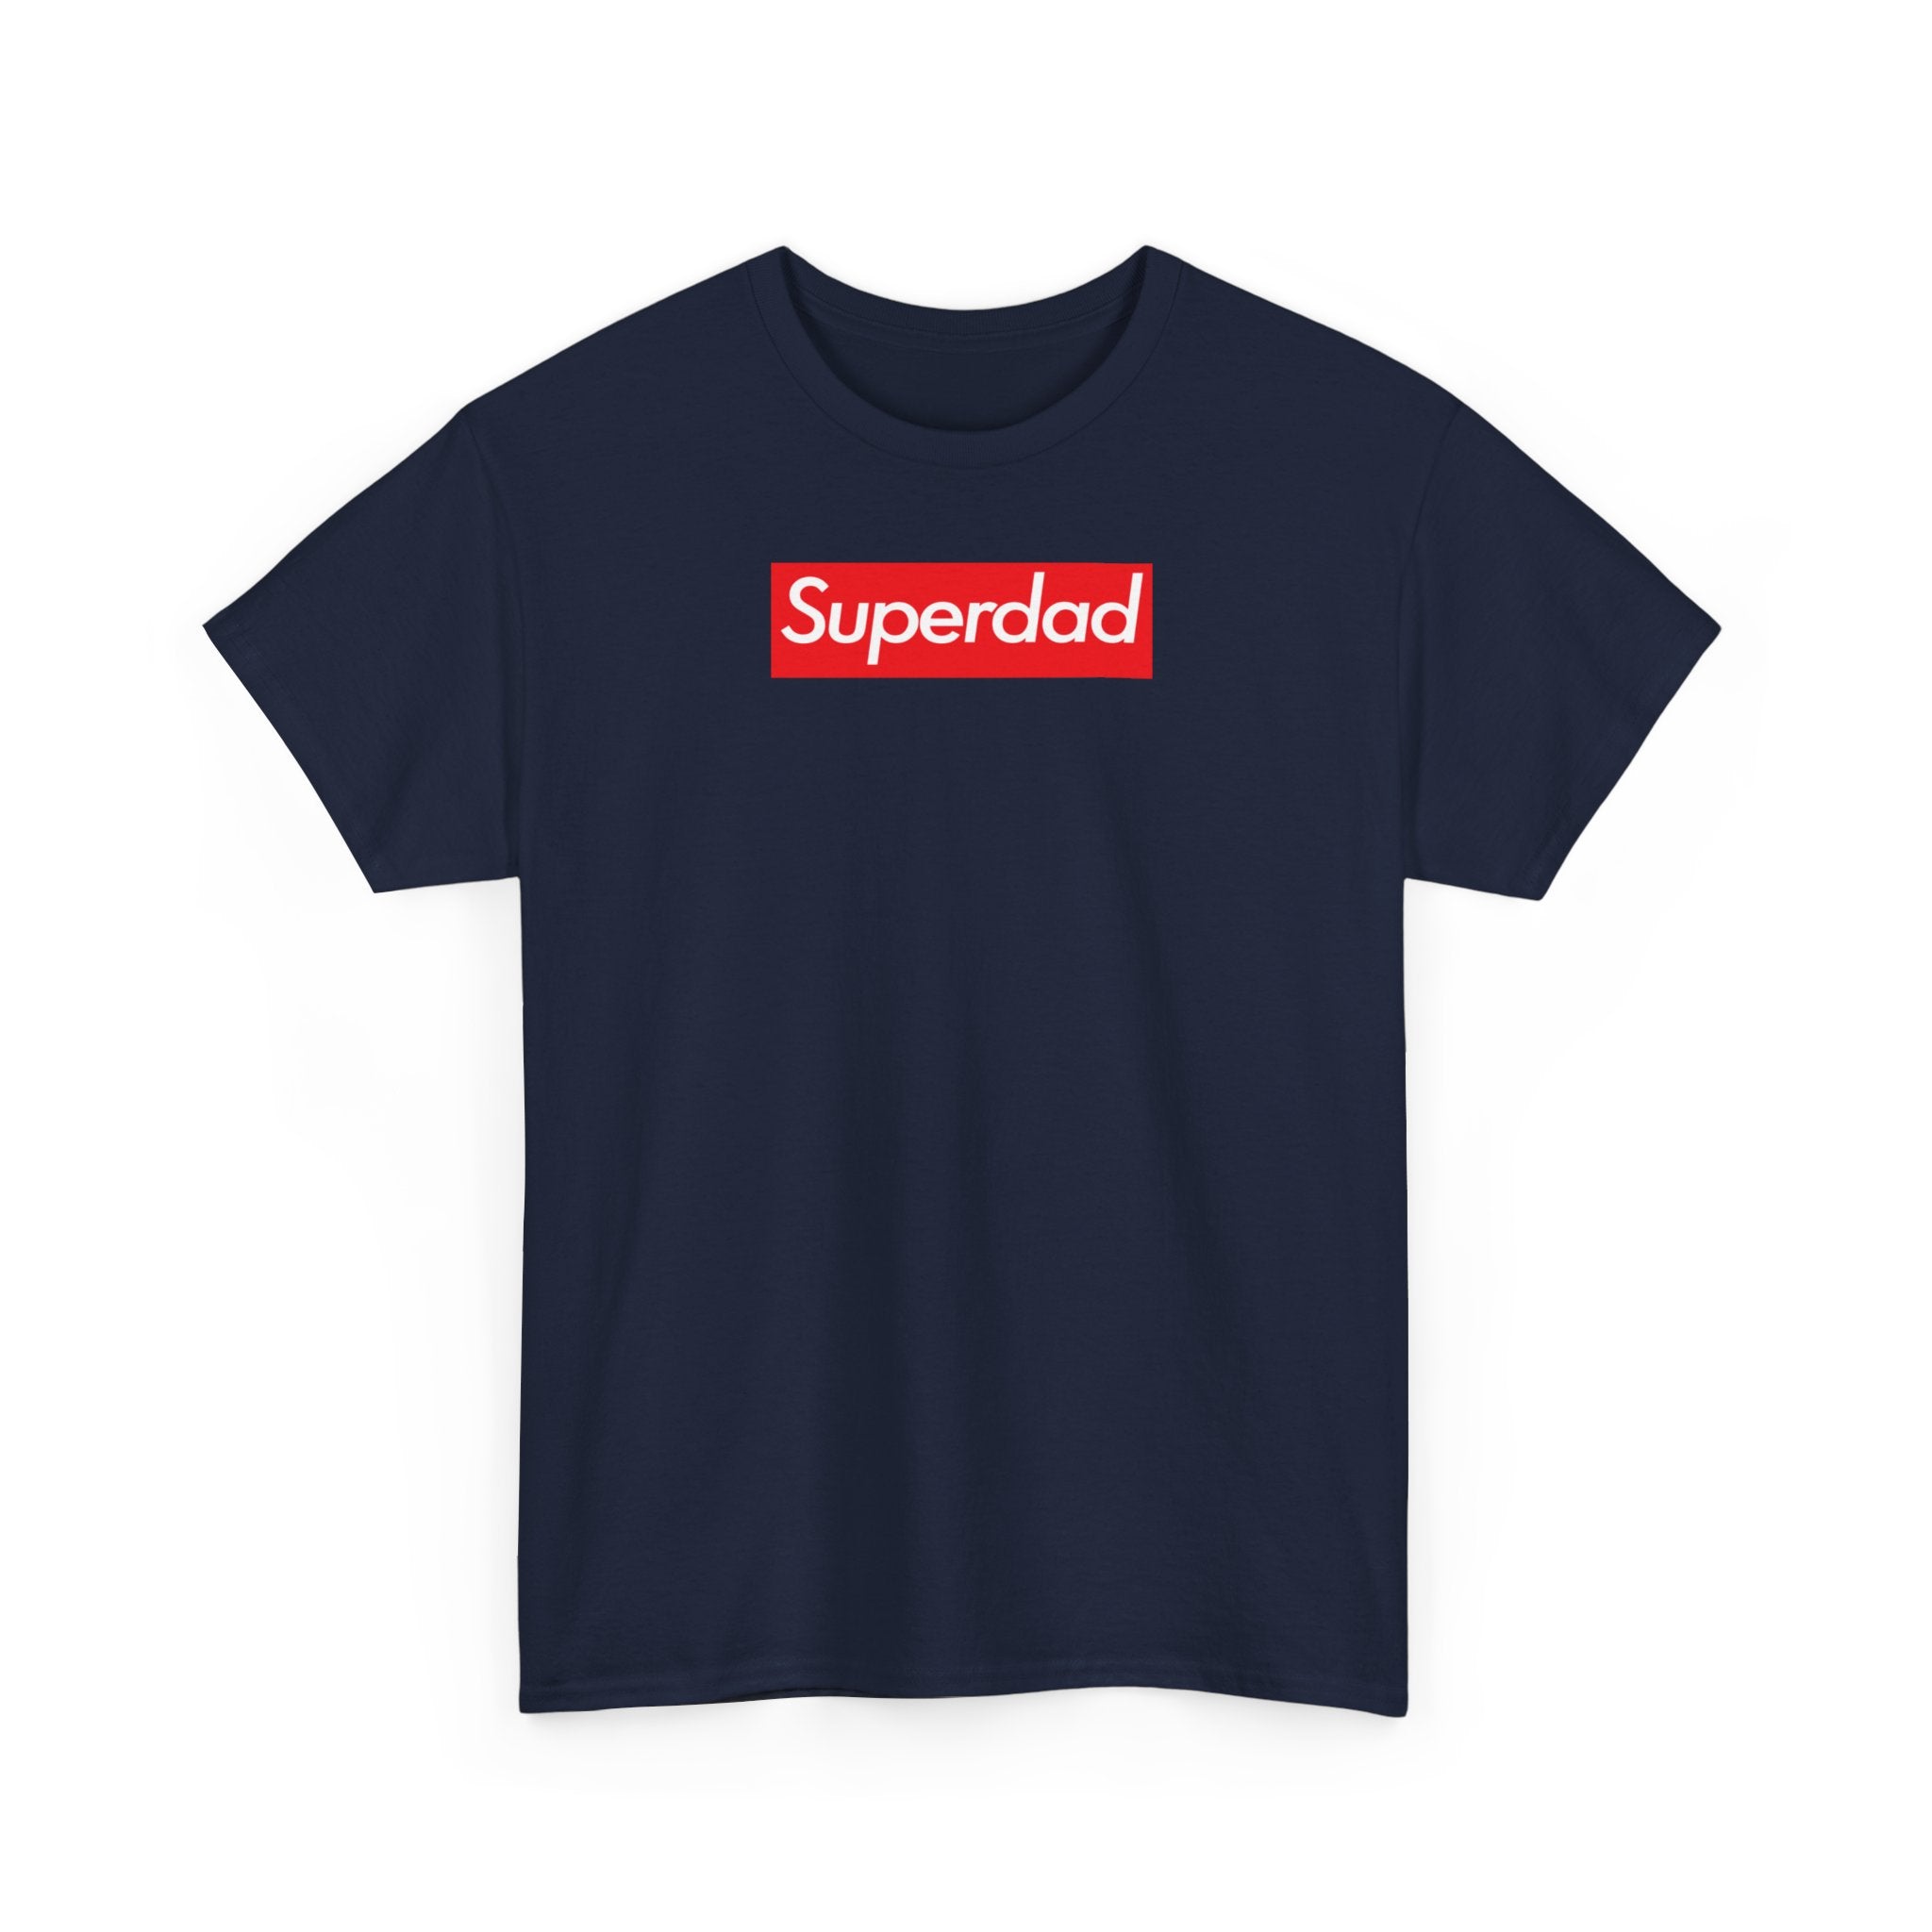 Superdad Unisex Heavy Cotton Tee Shirt T-shirt super Inspired Funny Dad Father Appreciation Gift For Dads Fathers Day Thank You Thankful Love Birthday Christmas